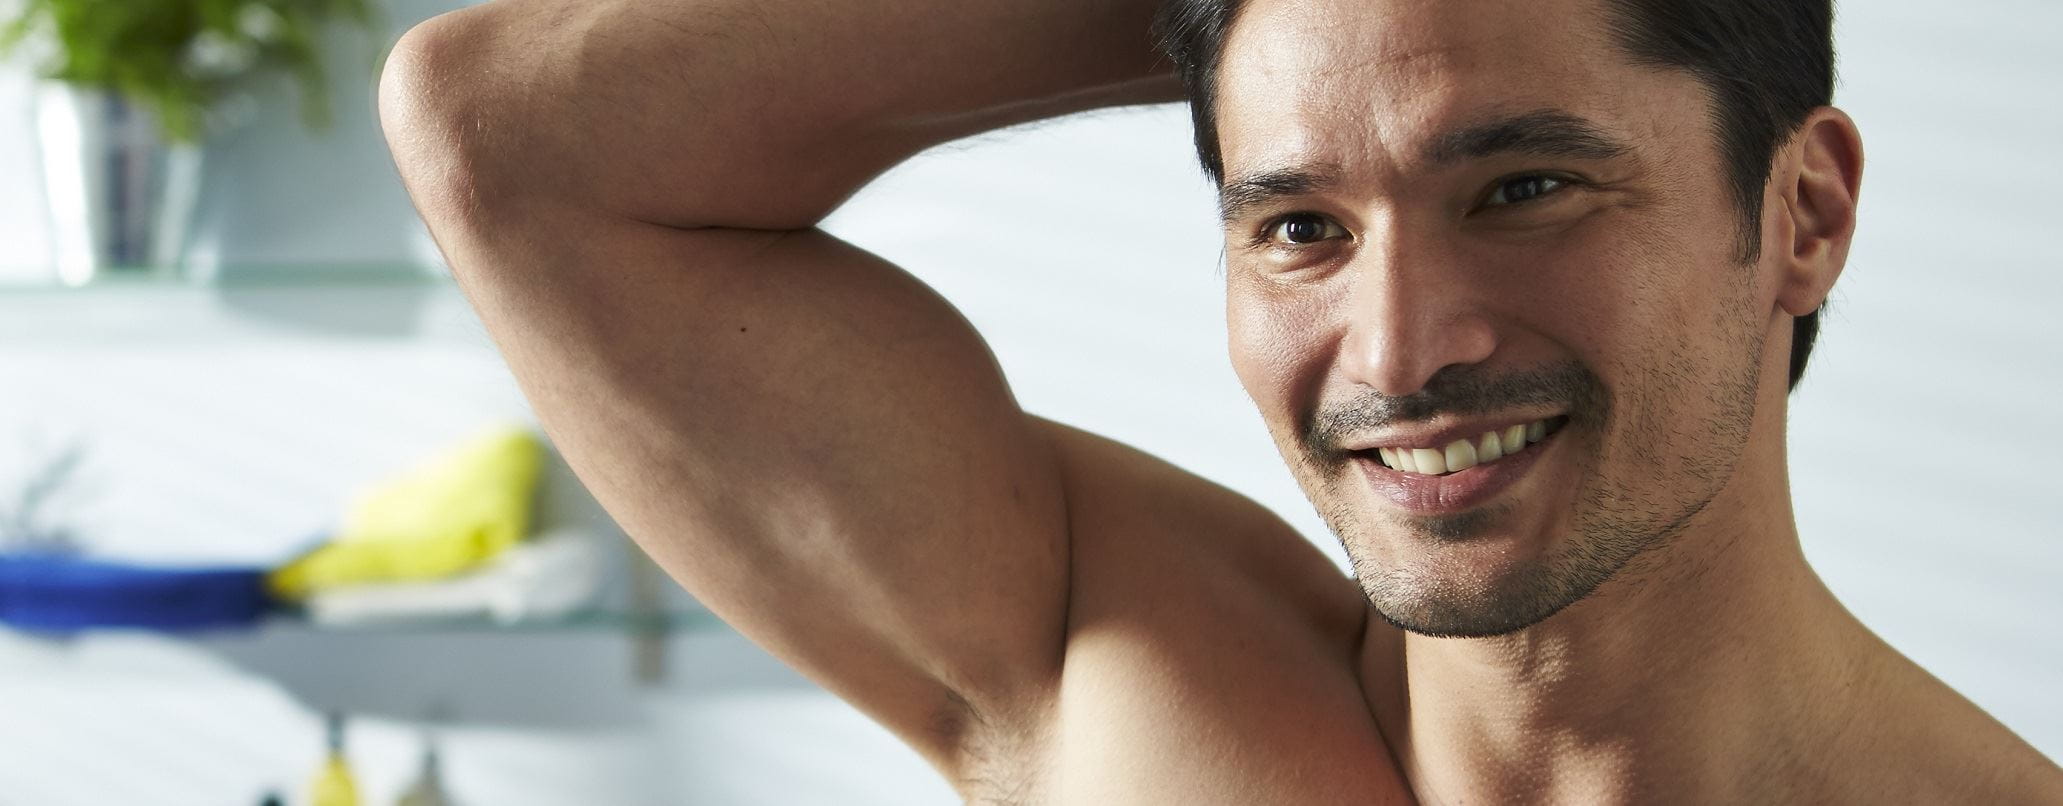 The manscaping guide with man smiling